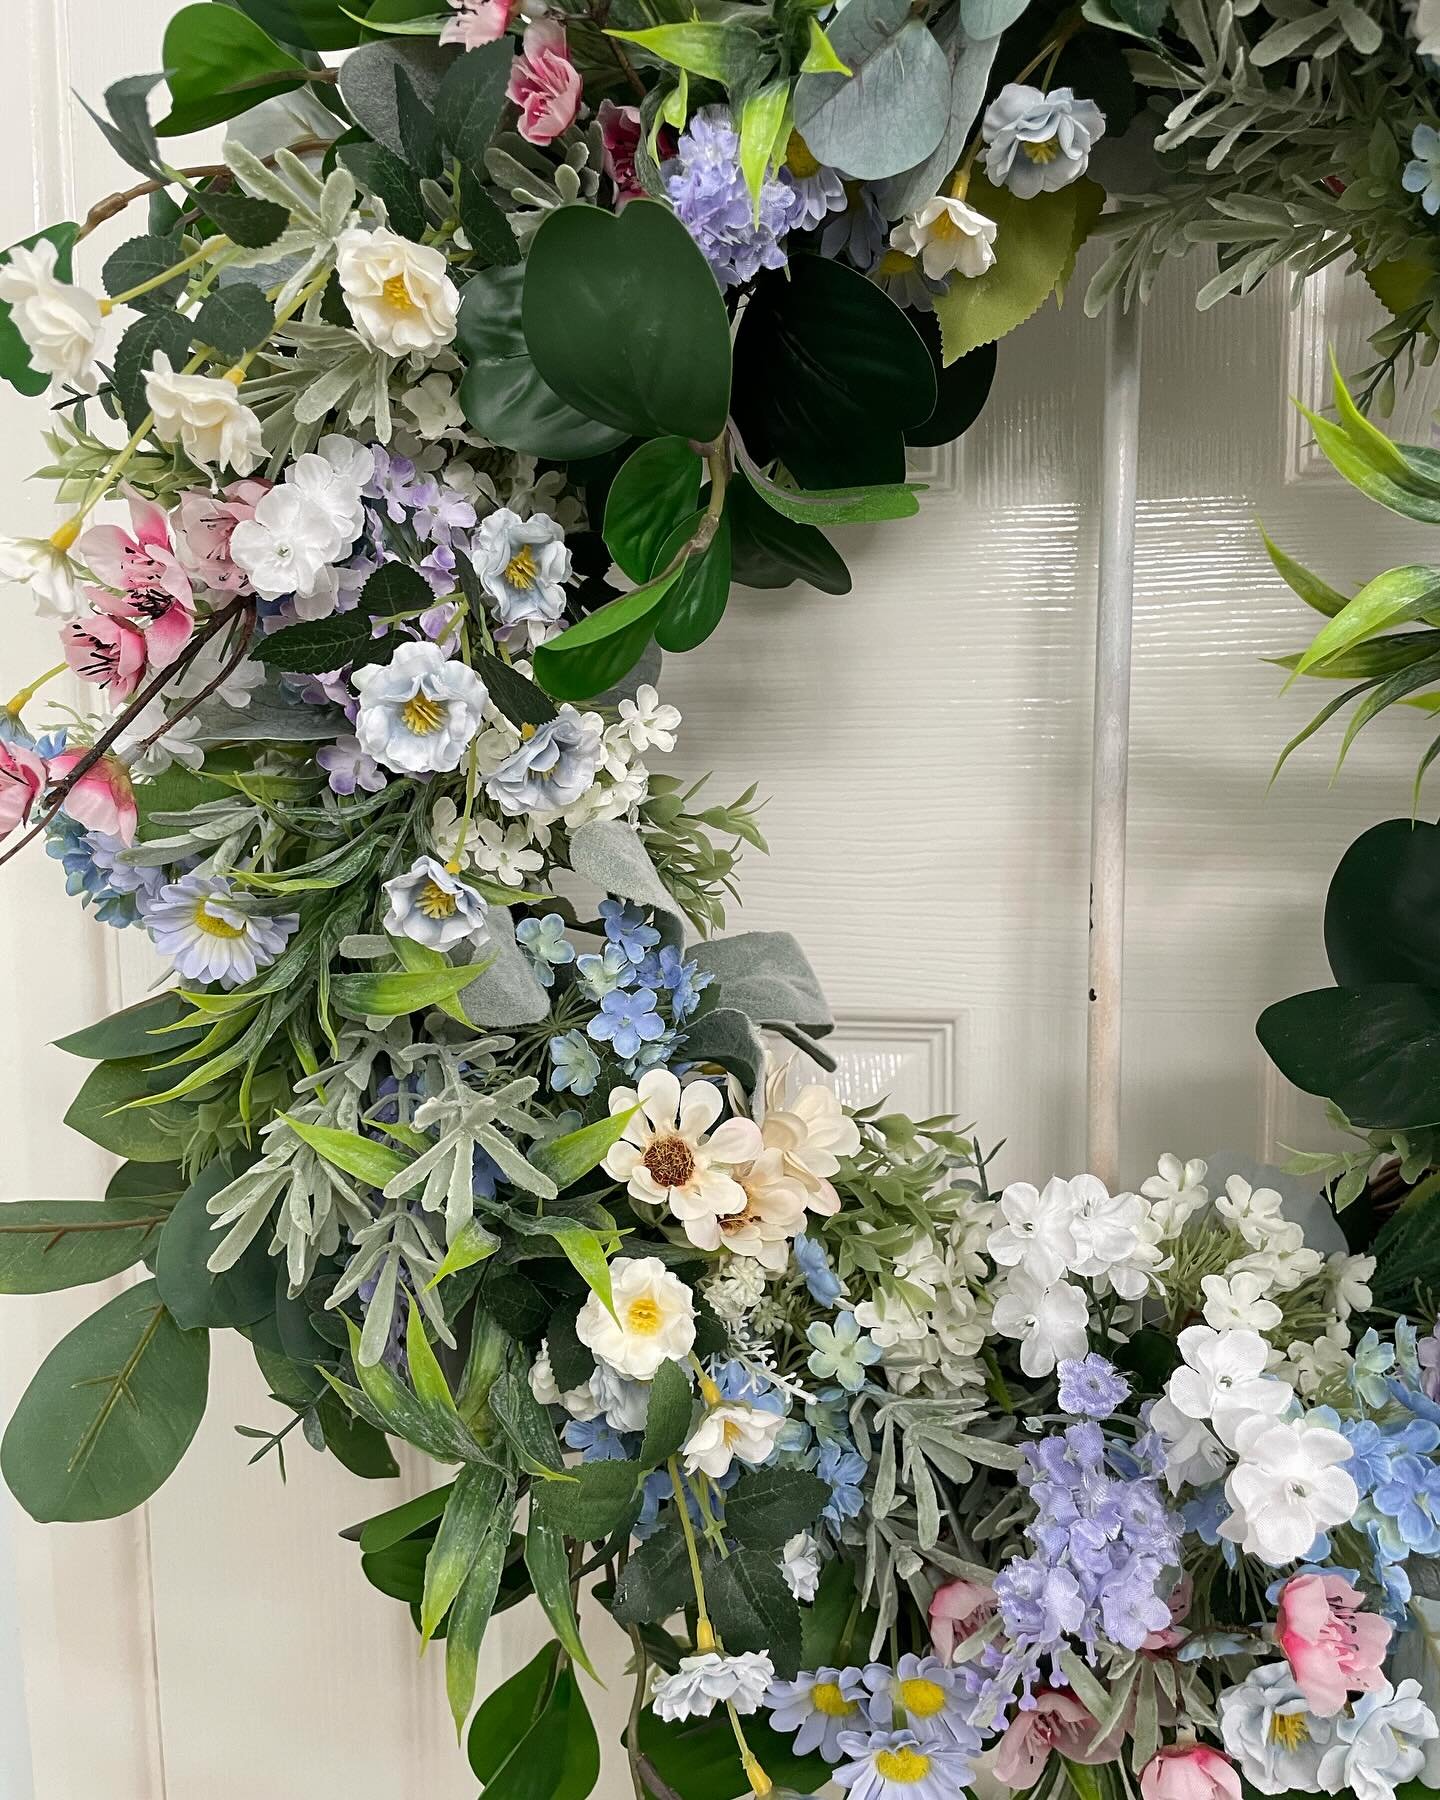 Spring blossom wreath a new design this last week and fast becoming my favourite and I think yours too. I love the delicate cornflower blue flowers and the heart shaped foliage. #springday #spring wreath #springflowers